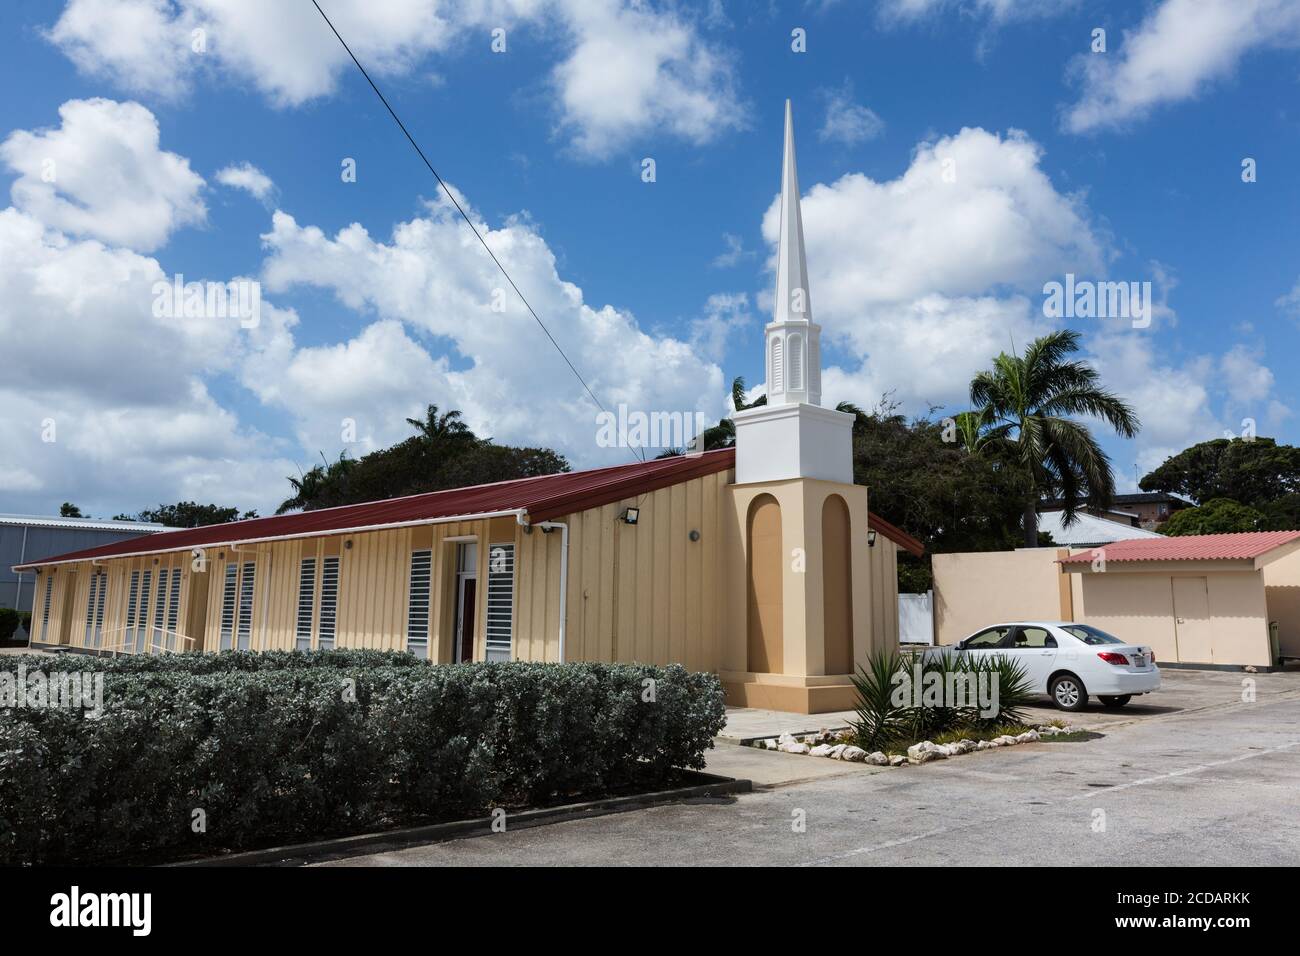 A meeting house or chapel of The Church of Jesus Christ of Latter-day Saints, or Mormons, in Willemstad, Curacao. Stock Photo